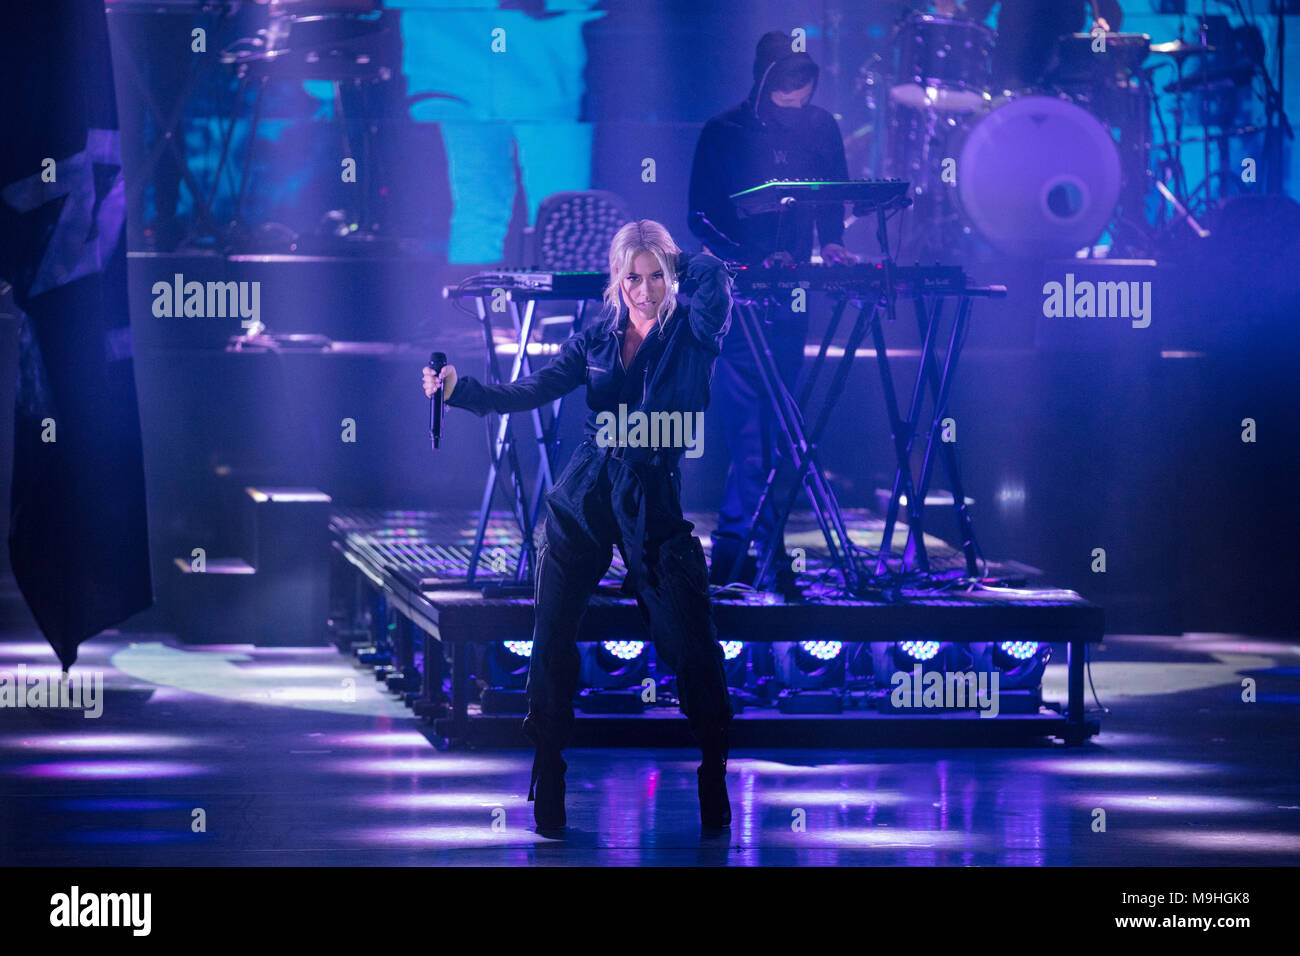 Norway, Oslo - February 25, 2018. The Norwegian DJ and record producer Alan  Walker performs a live concert at Oslo Konserthus during the Norwegian  Grammy Awards, Spellemannprisen 2017, in Oslo. Here the